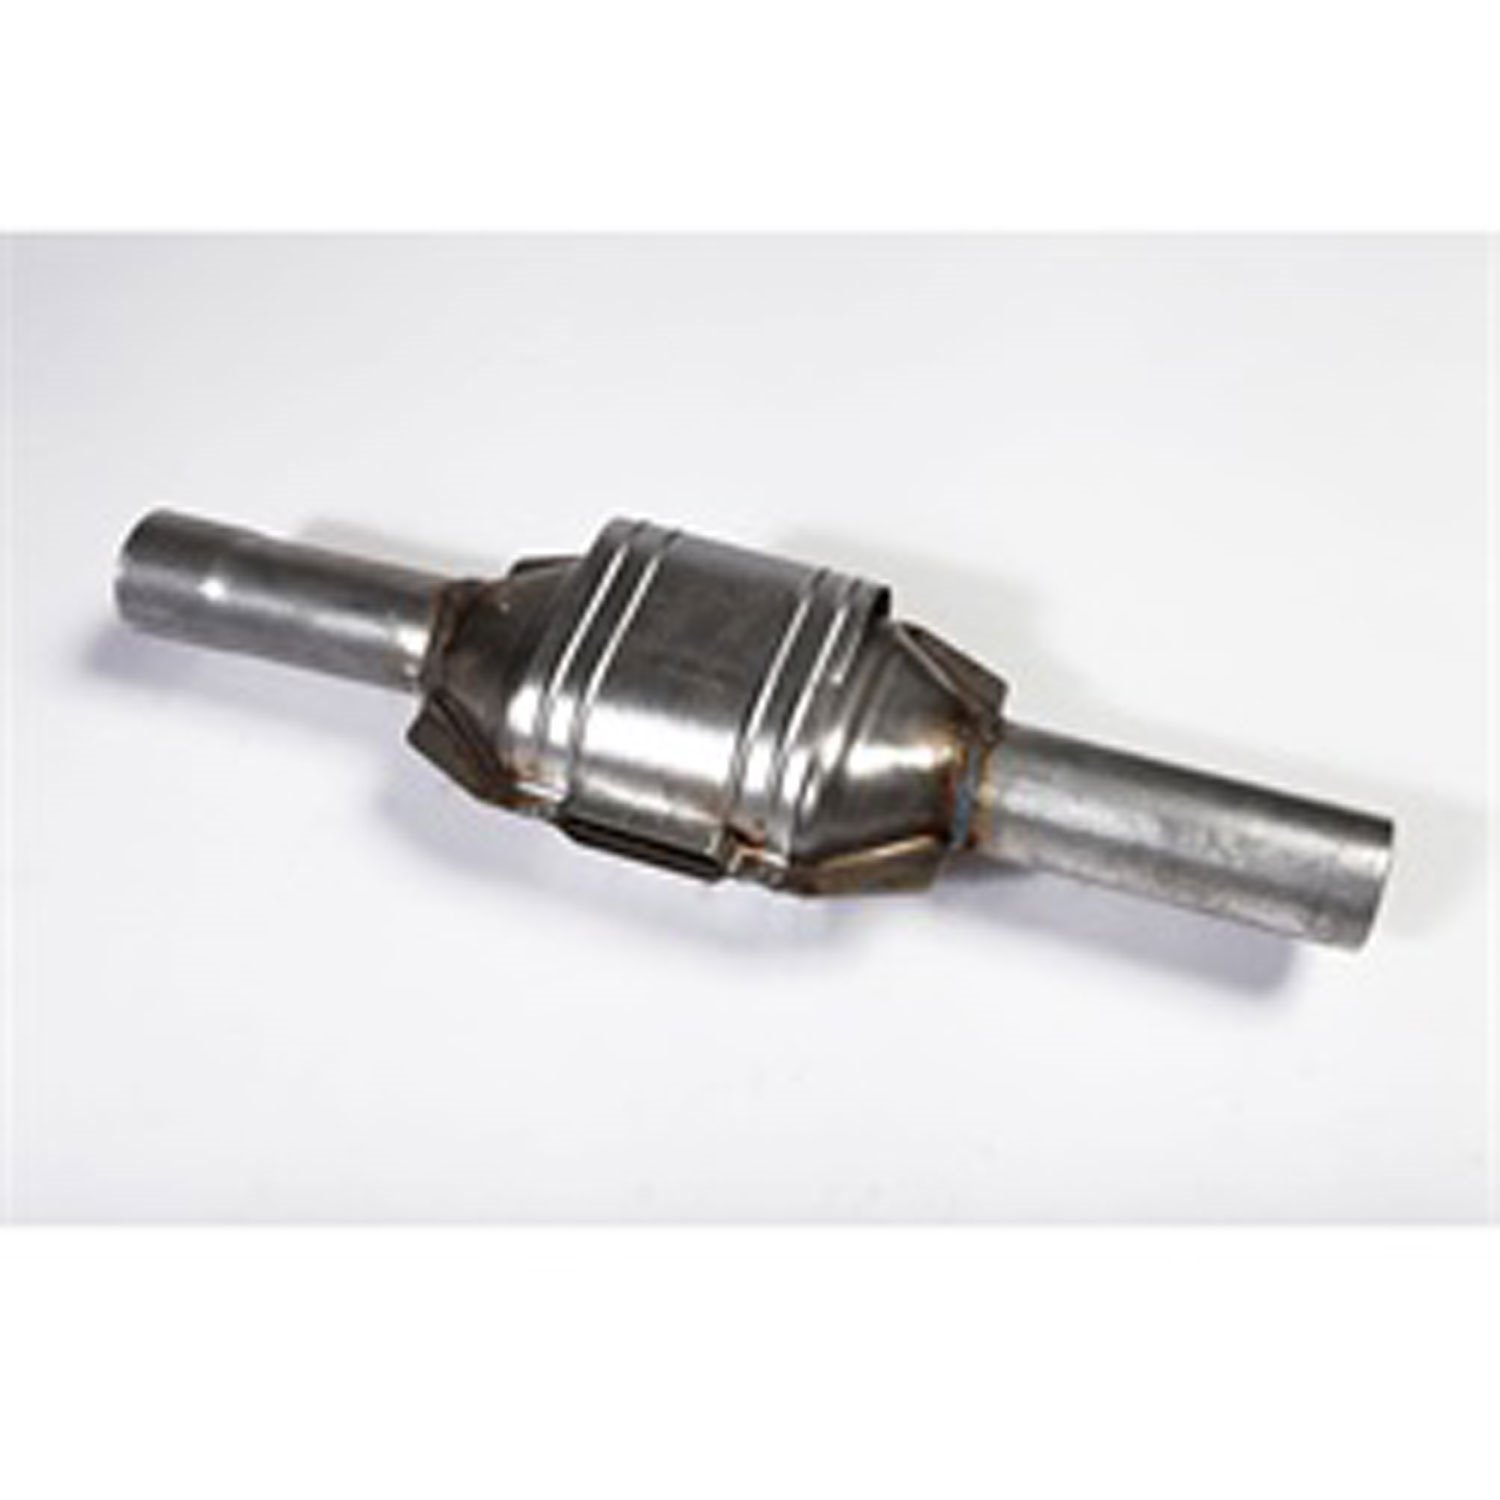 Replacement catalytic converter from Omix-ADA, Fits 93-95 Jeep Cherokees Grand Cherokees and Wra